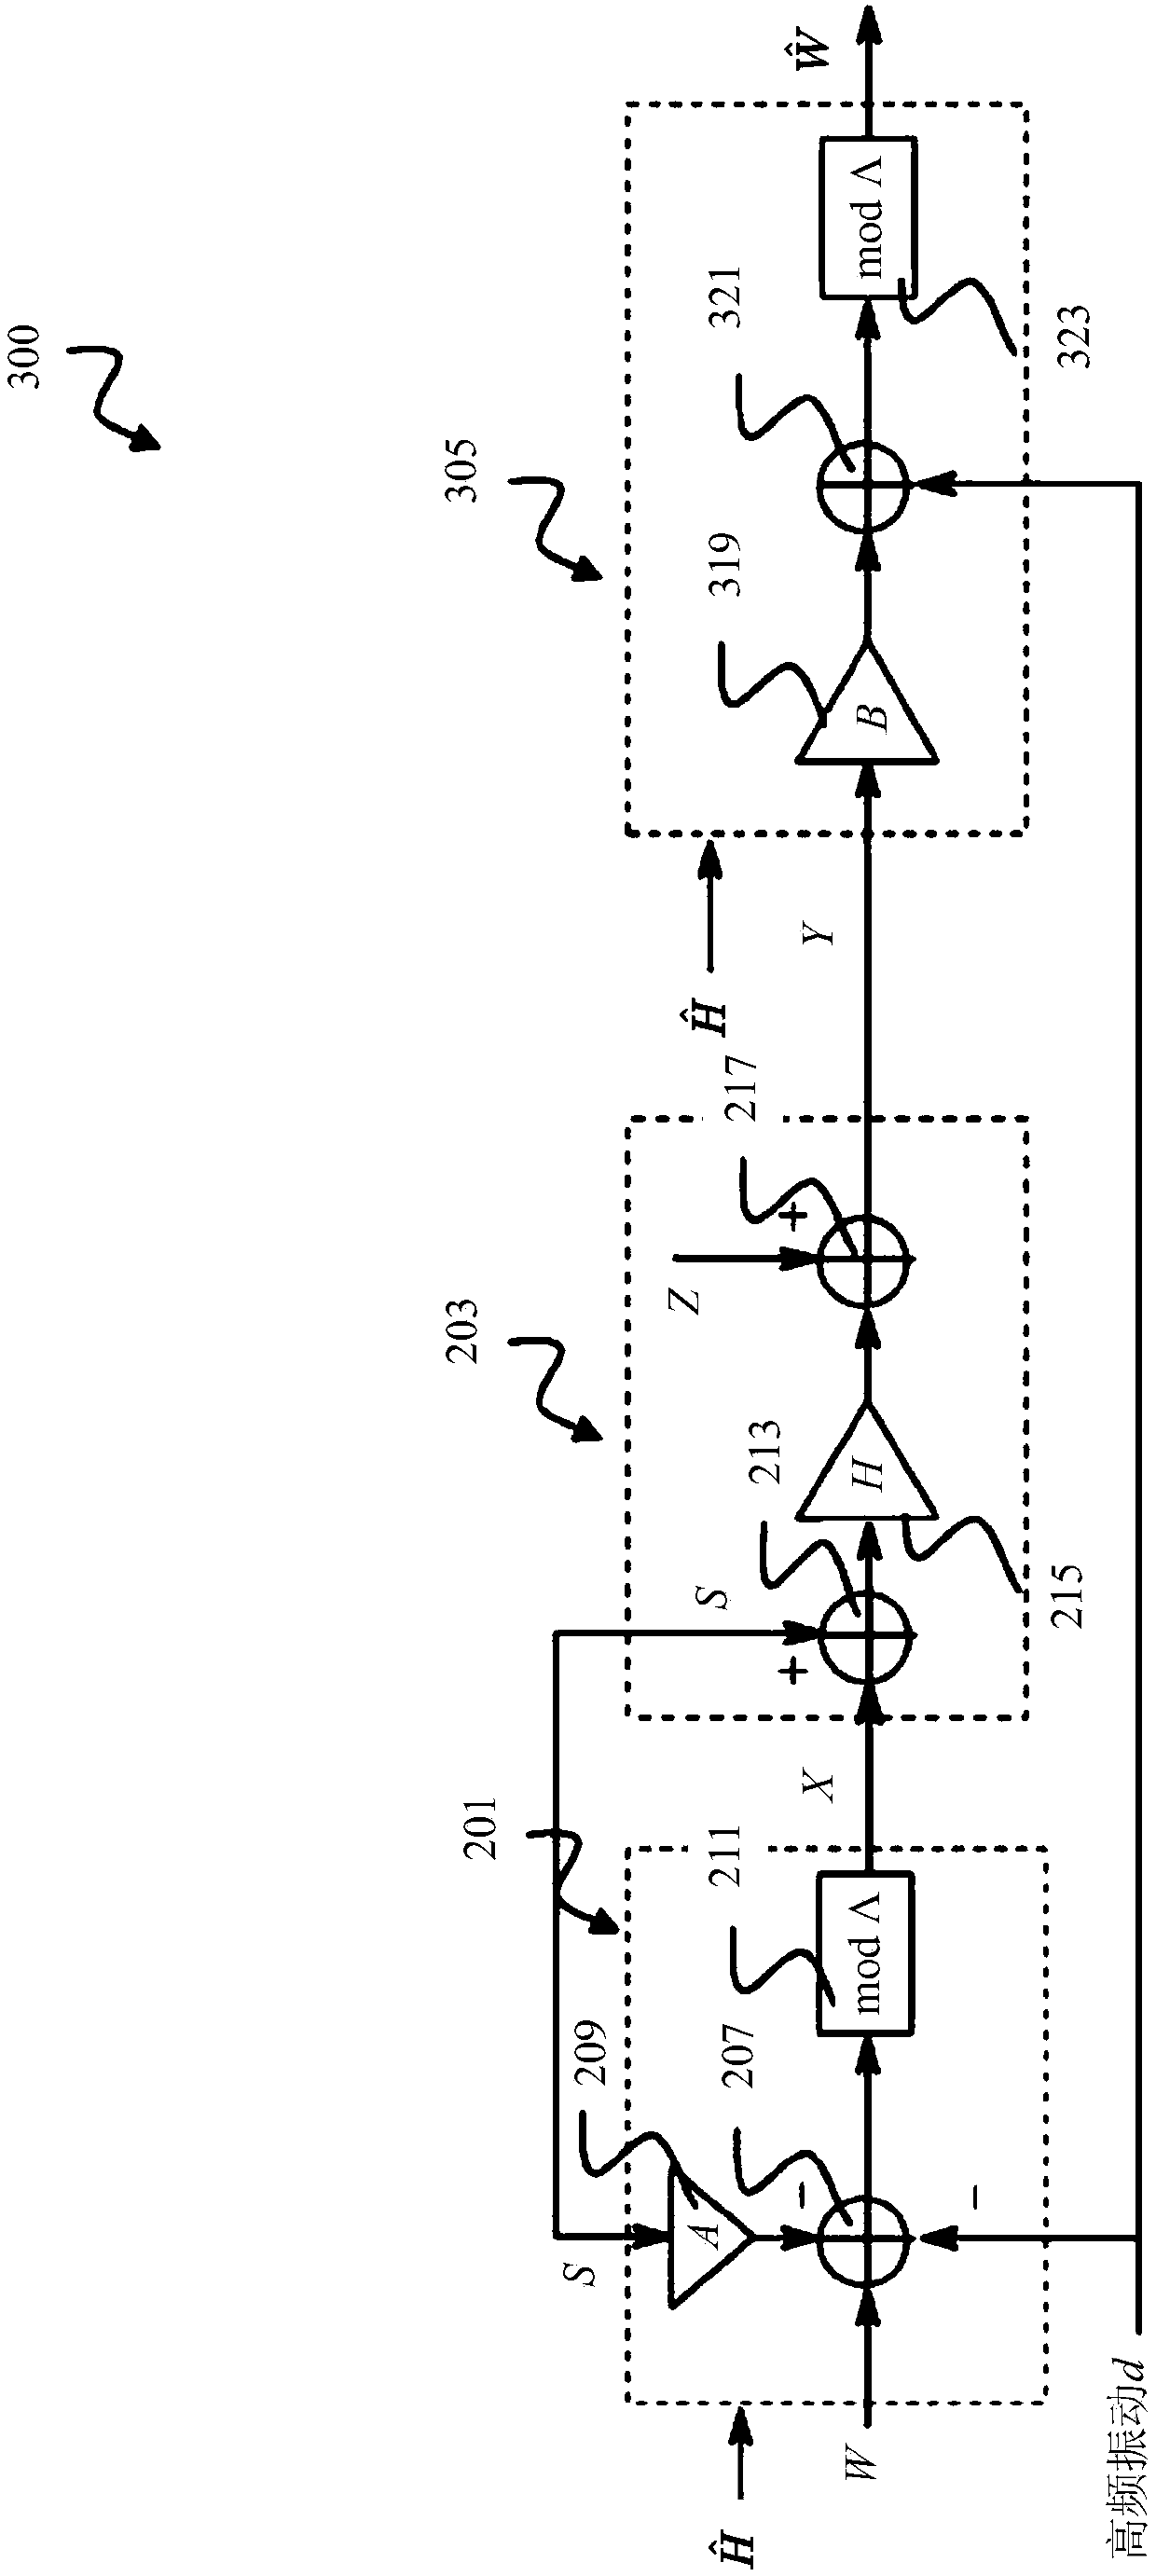 Receiver and precoding system using asymmetric imperfect channel knowledge